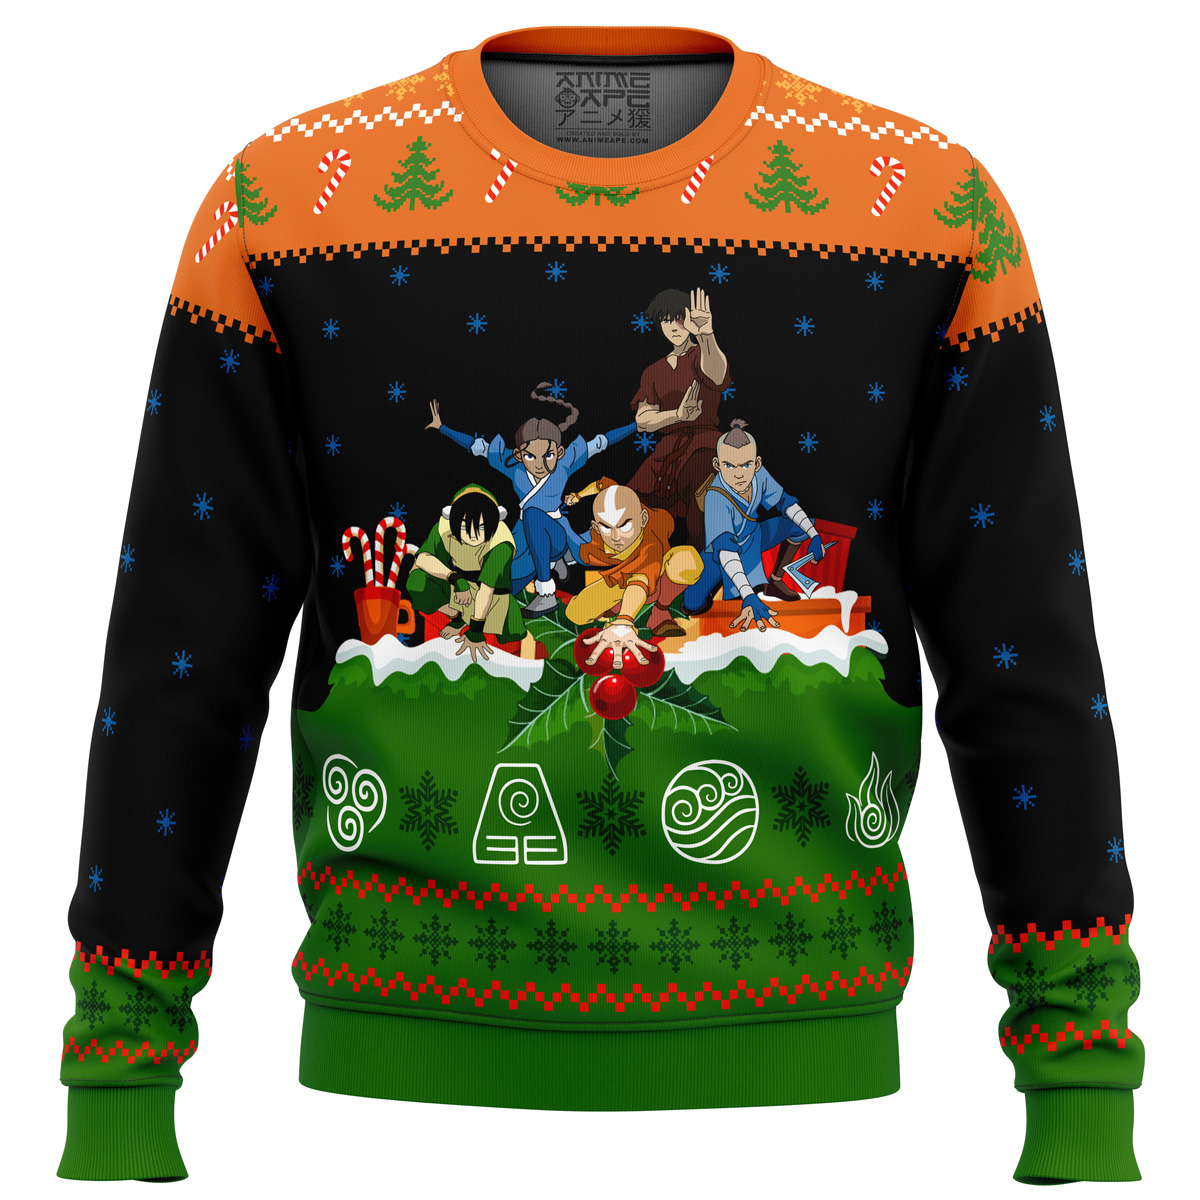 avatar the last airbender on the chimney top ugly christmas sweater ana2207 5069 - Fandomaniax Store